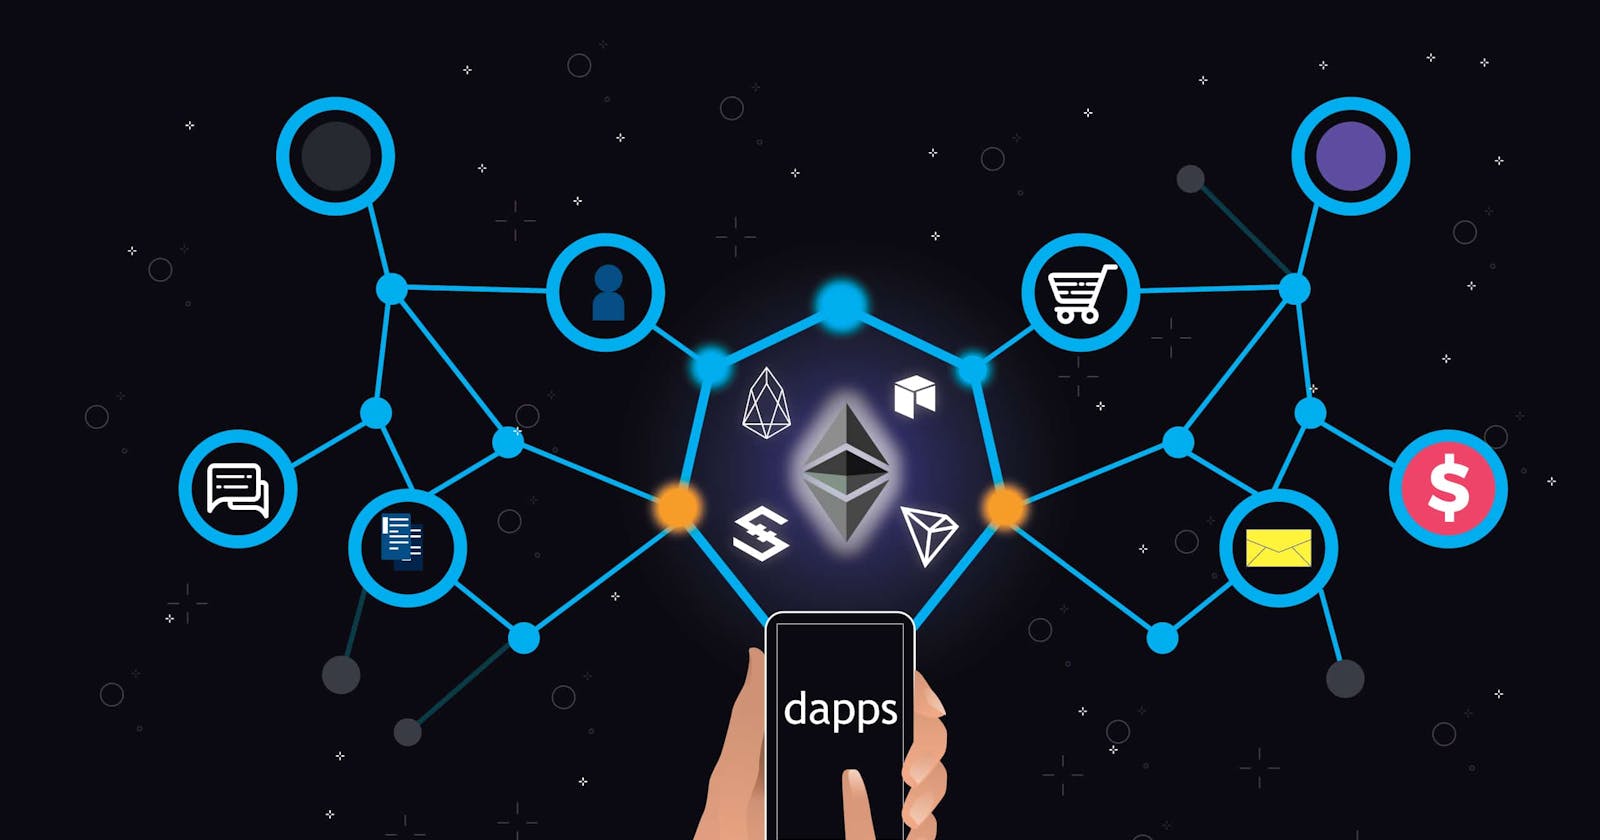 DAPPS-Decentralized Applications